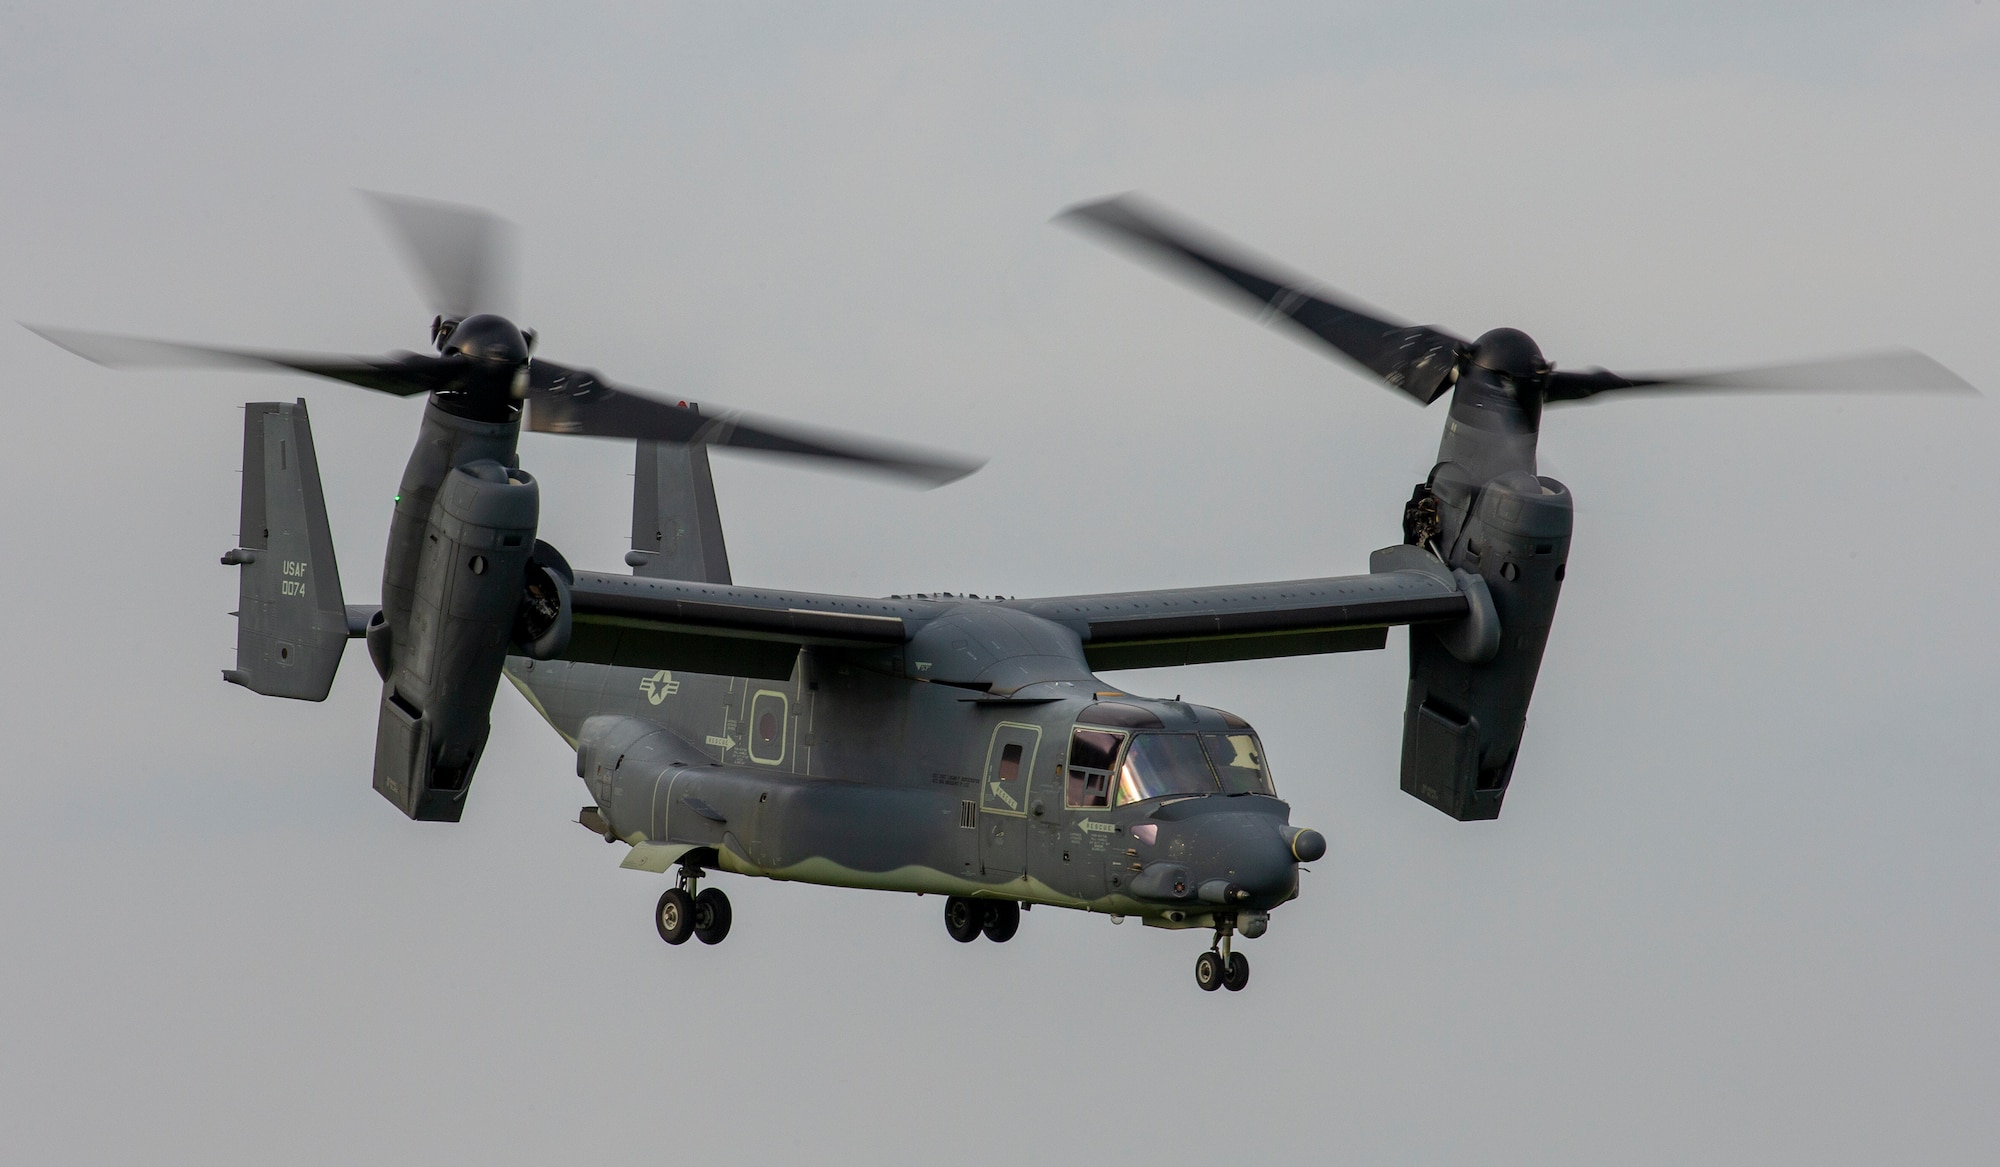 A CV-22 Osprey assigned to the 21st Special Operations Squadron flies over Yokota Air Base, Japan, June 15, 2020, during exercise Gryphon Jet. Gryphon Jet is an integrated training exercise focused on improving interoperability throughout the special operations community. (U.S. Air Force photo by Yasuo Osakabe)